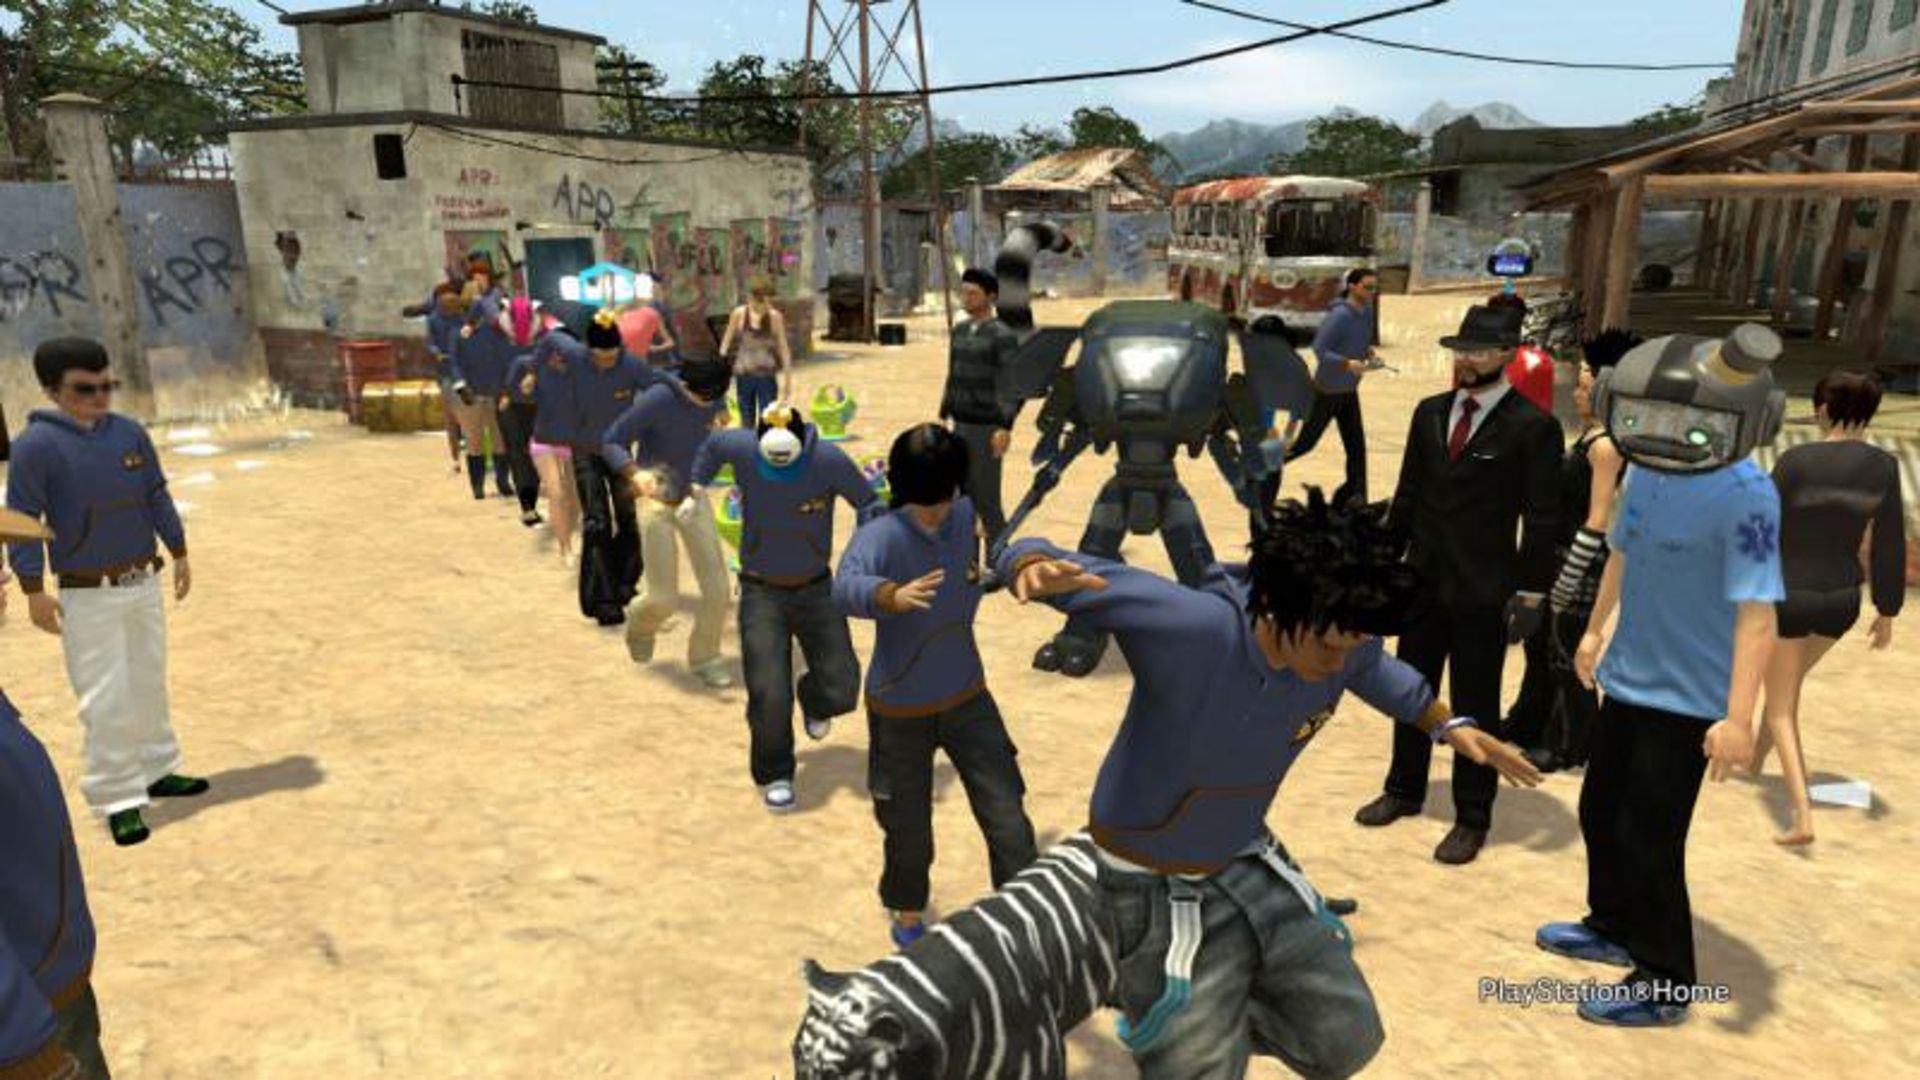 PlayStation Home 1